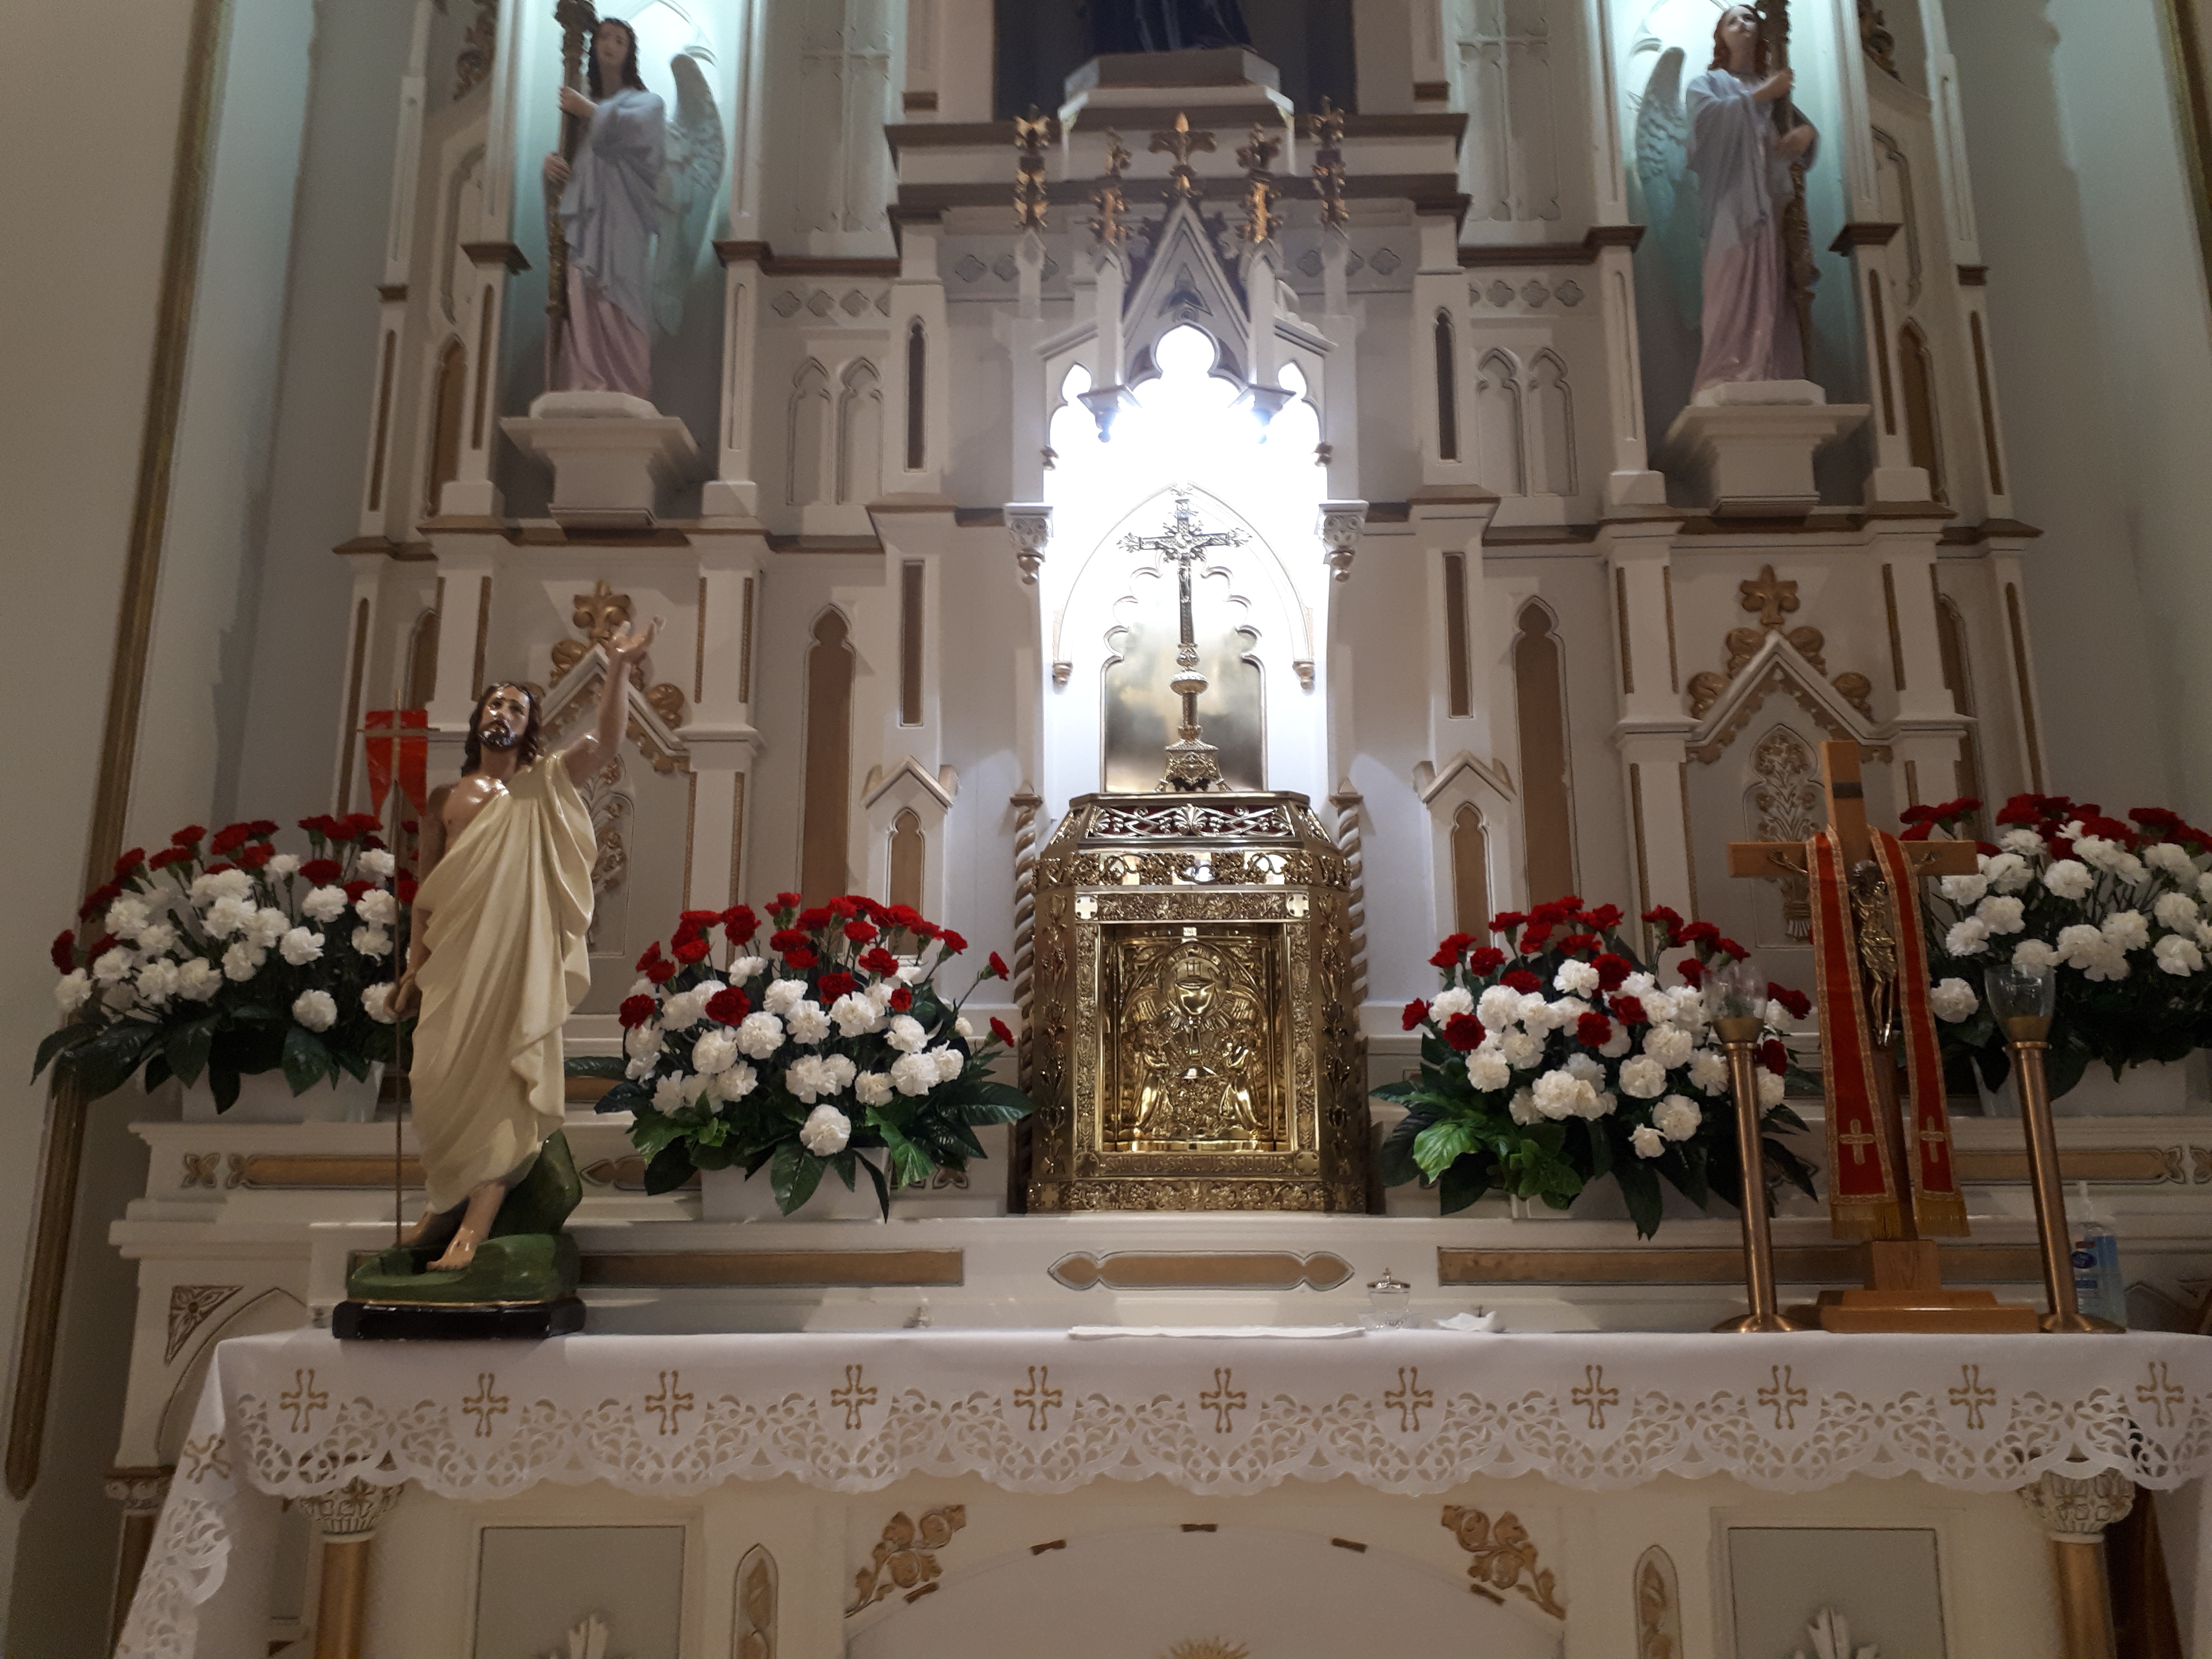 Main Altar decorated with red & white carnations